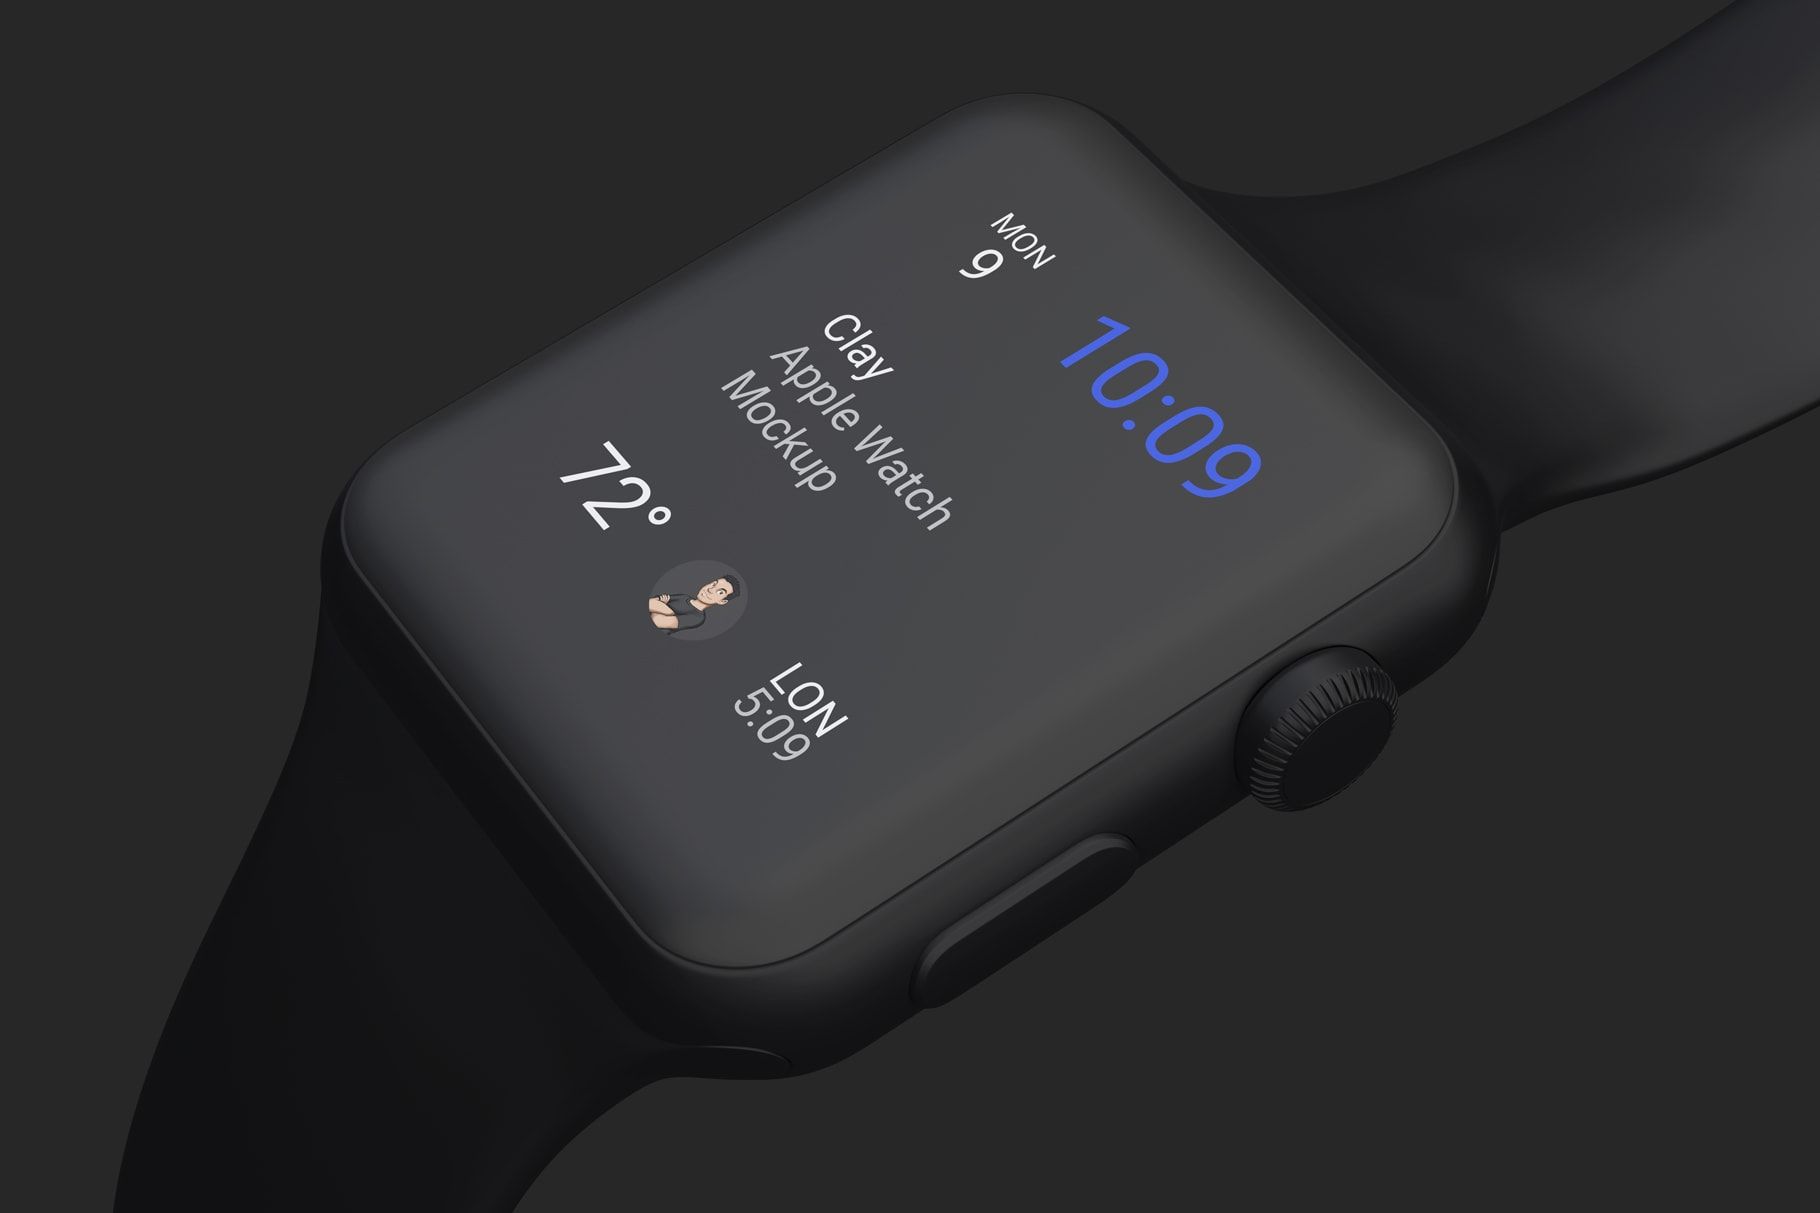 Clay Apple Watch Mockup to Present Watchos Apps